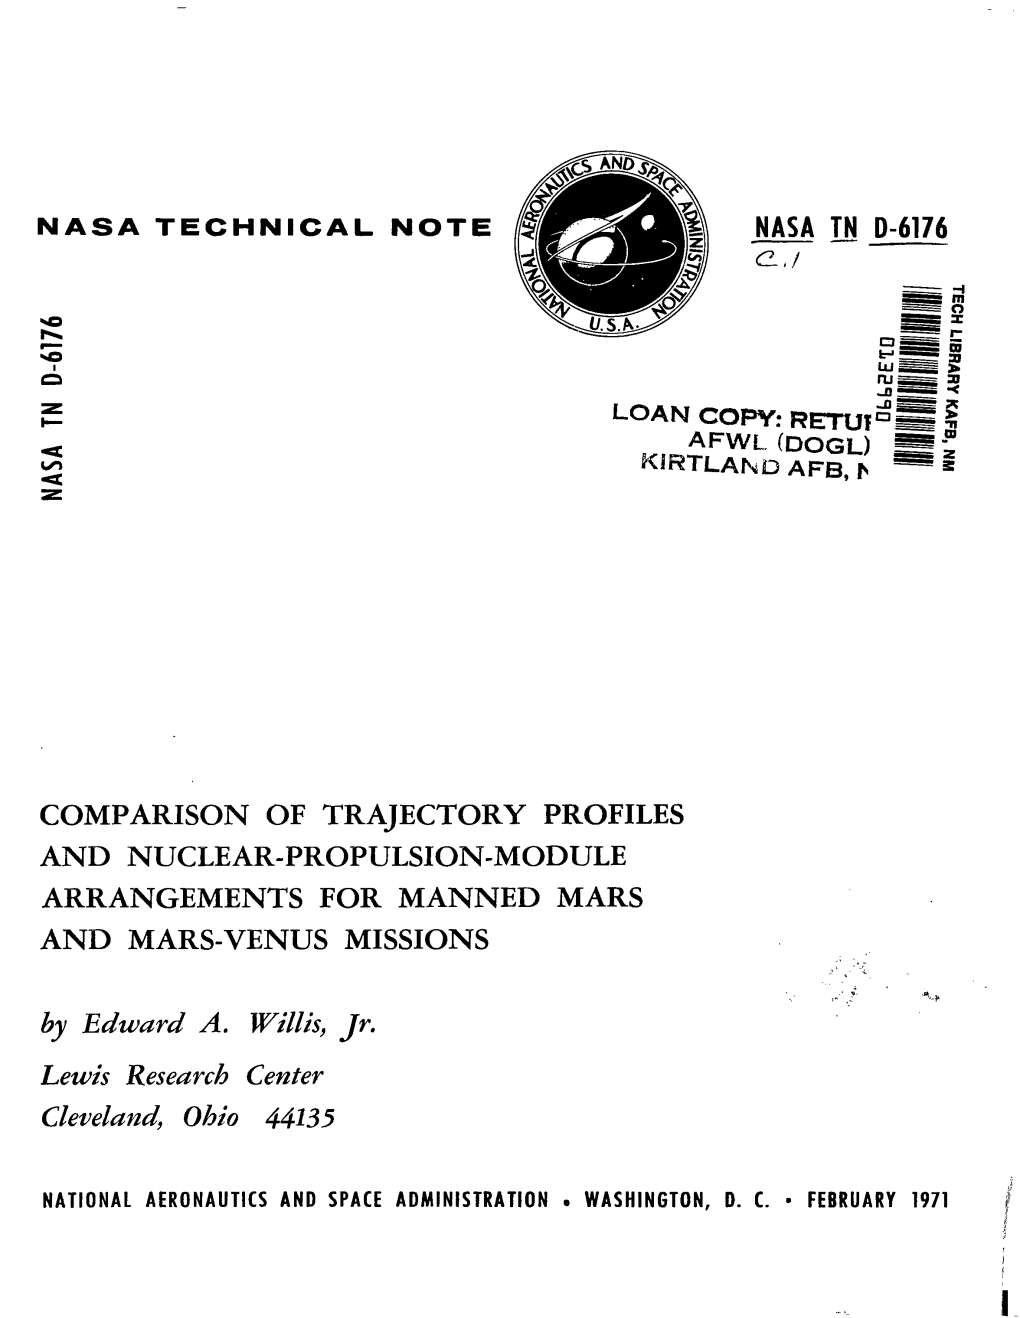 COMPARISON of TRAJECTORY PROFILES and NUCLEAR-PROPULSION-MODULE ARRANGEMENTS for MANNED MARS and MARS-VENUS MISSIONS by Edwurd A